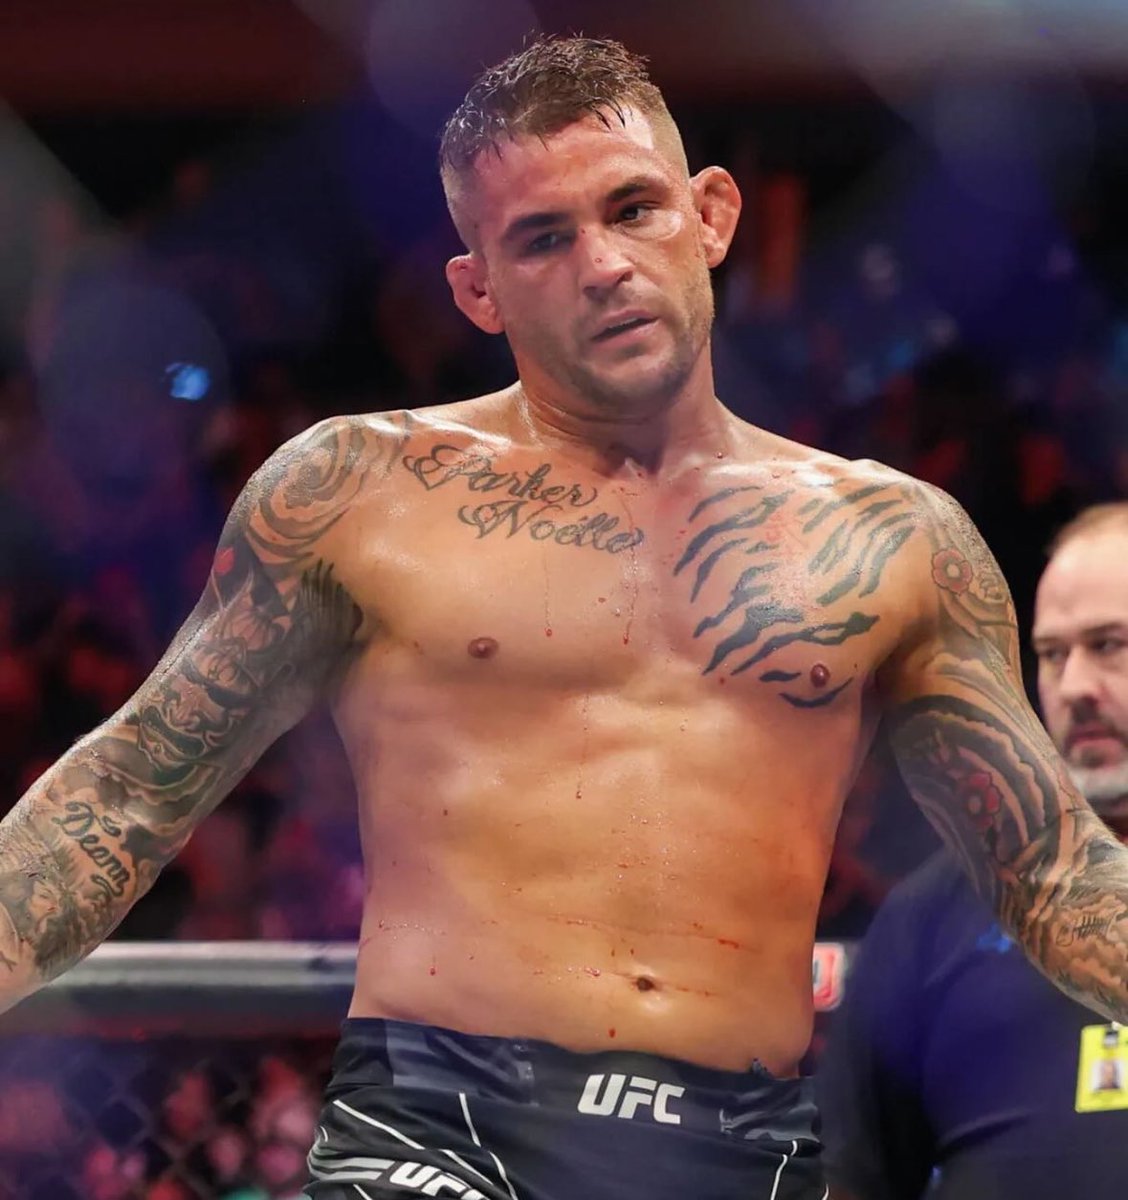 Is Dustin Poirier the greatest fighter to never win an undisputed UFC Championship? 🧐